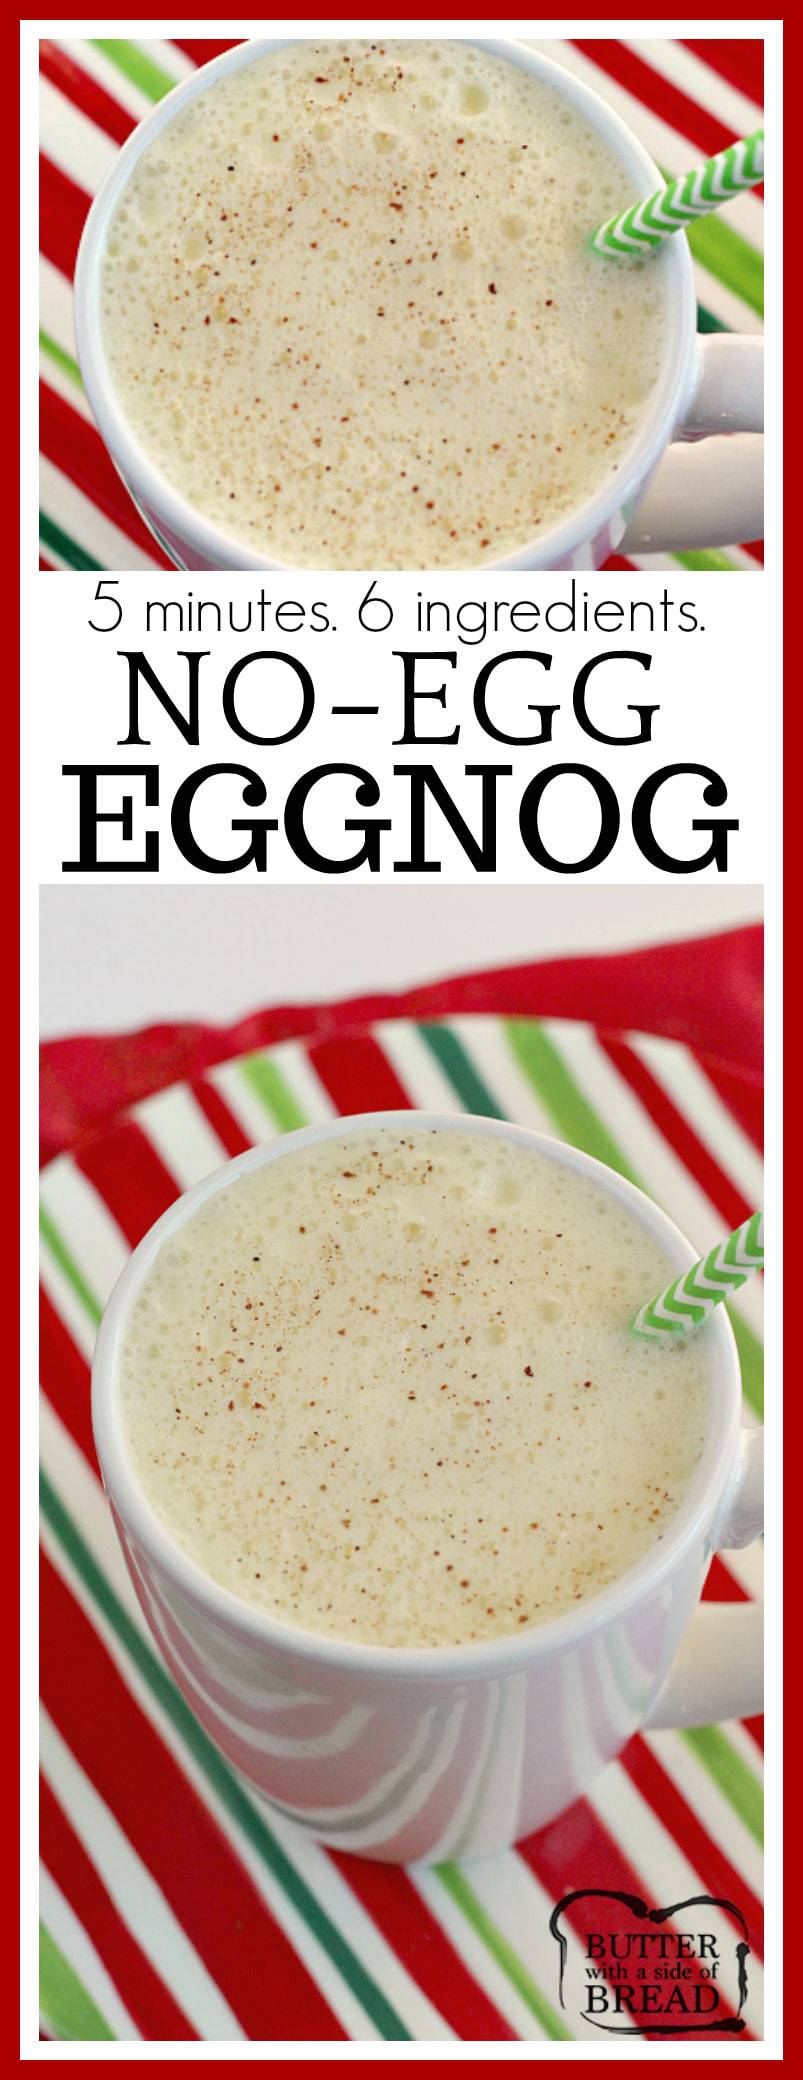 Easy No-Egg Eggnog can be made quickly in a blender with French vanilla pudding, milk, whipped cream and a few other basic ingredients! Easy #eggnog #recipe for #Christmas #holidays from Butter With A Side of Bread #beverage #drink #mocktail